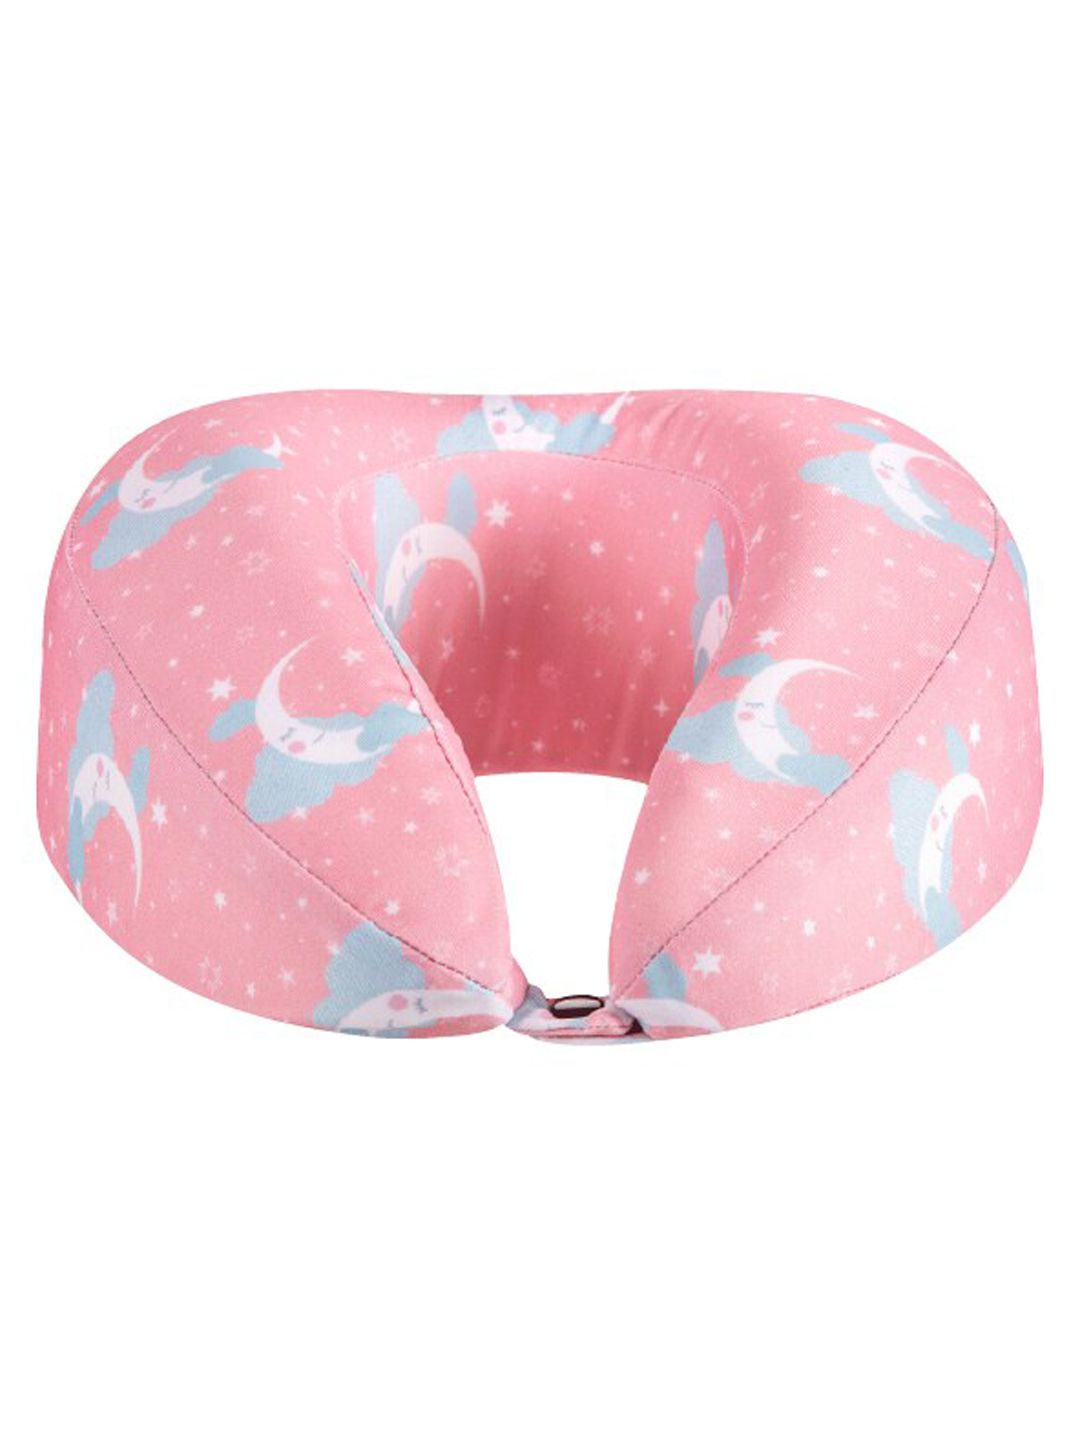 The White Willow Pink And White Printed U-Shaped Travel Neck Pillow Price in India